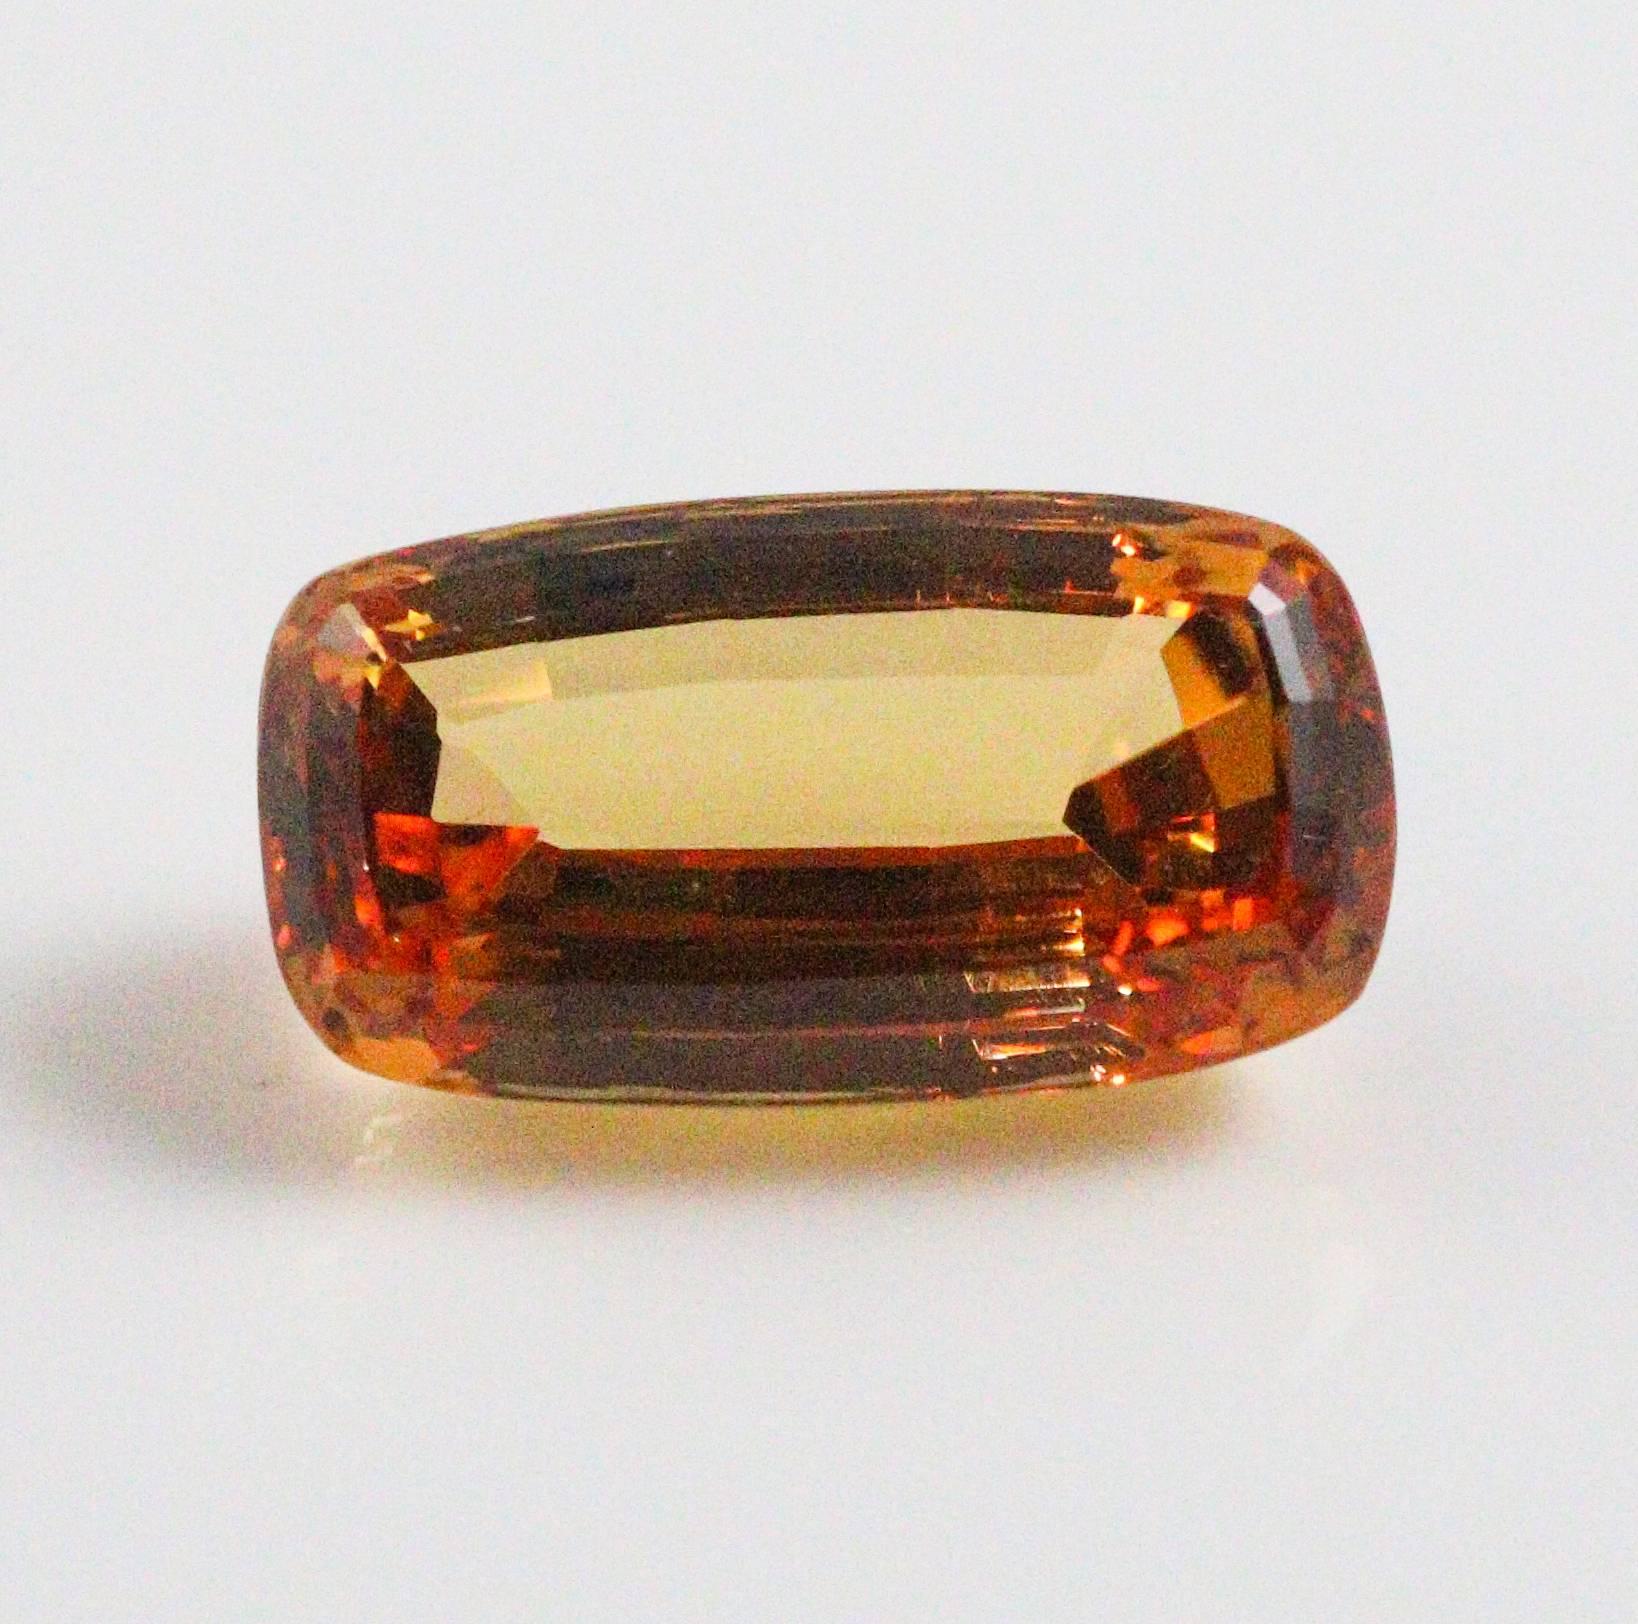 32.18 Carat GIA and PGS Certified Cushion Cut Imperial Topaz 1